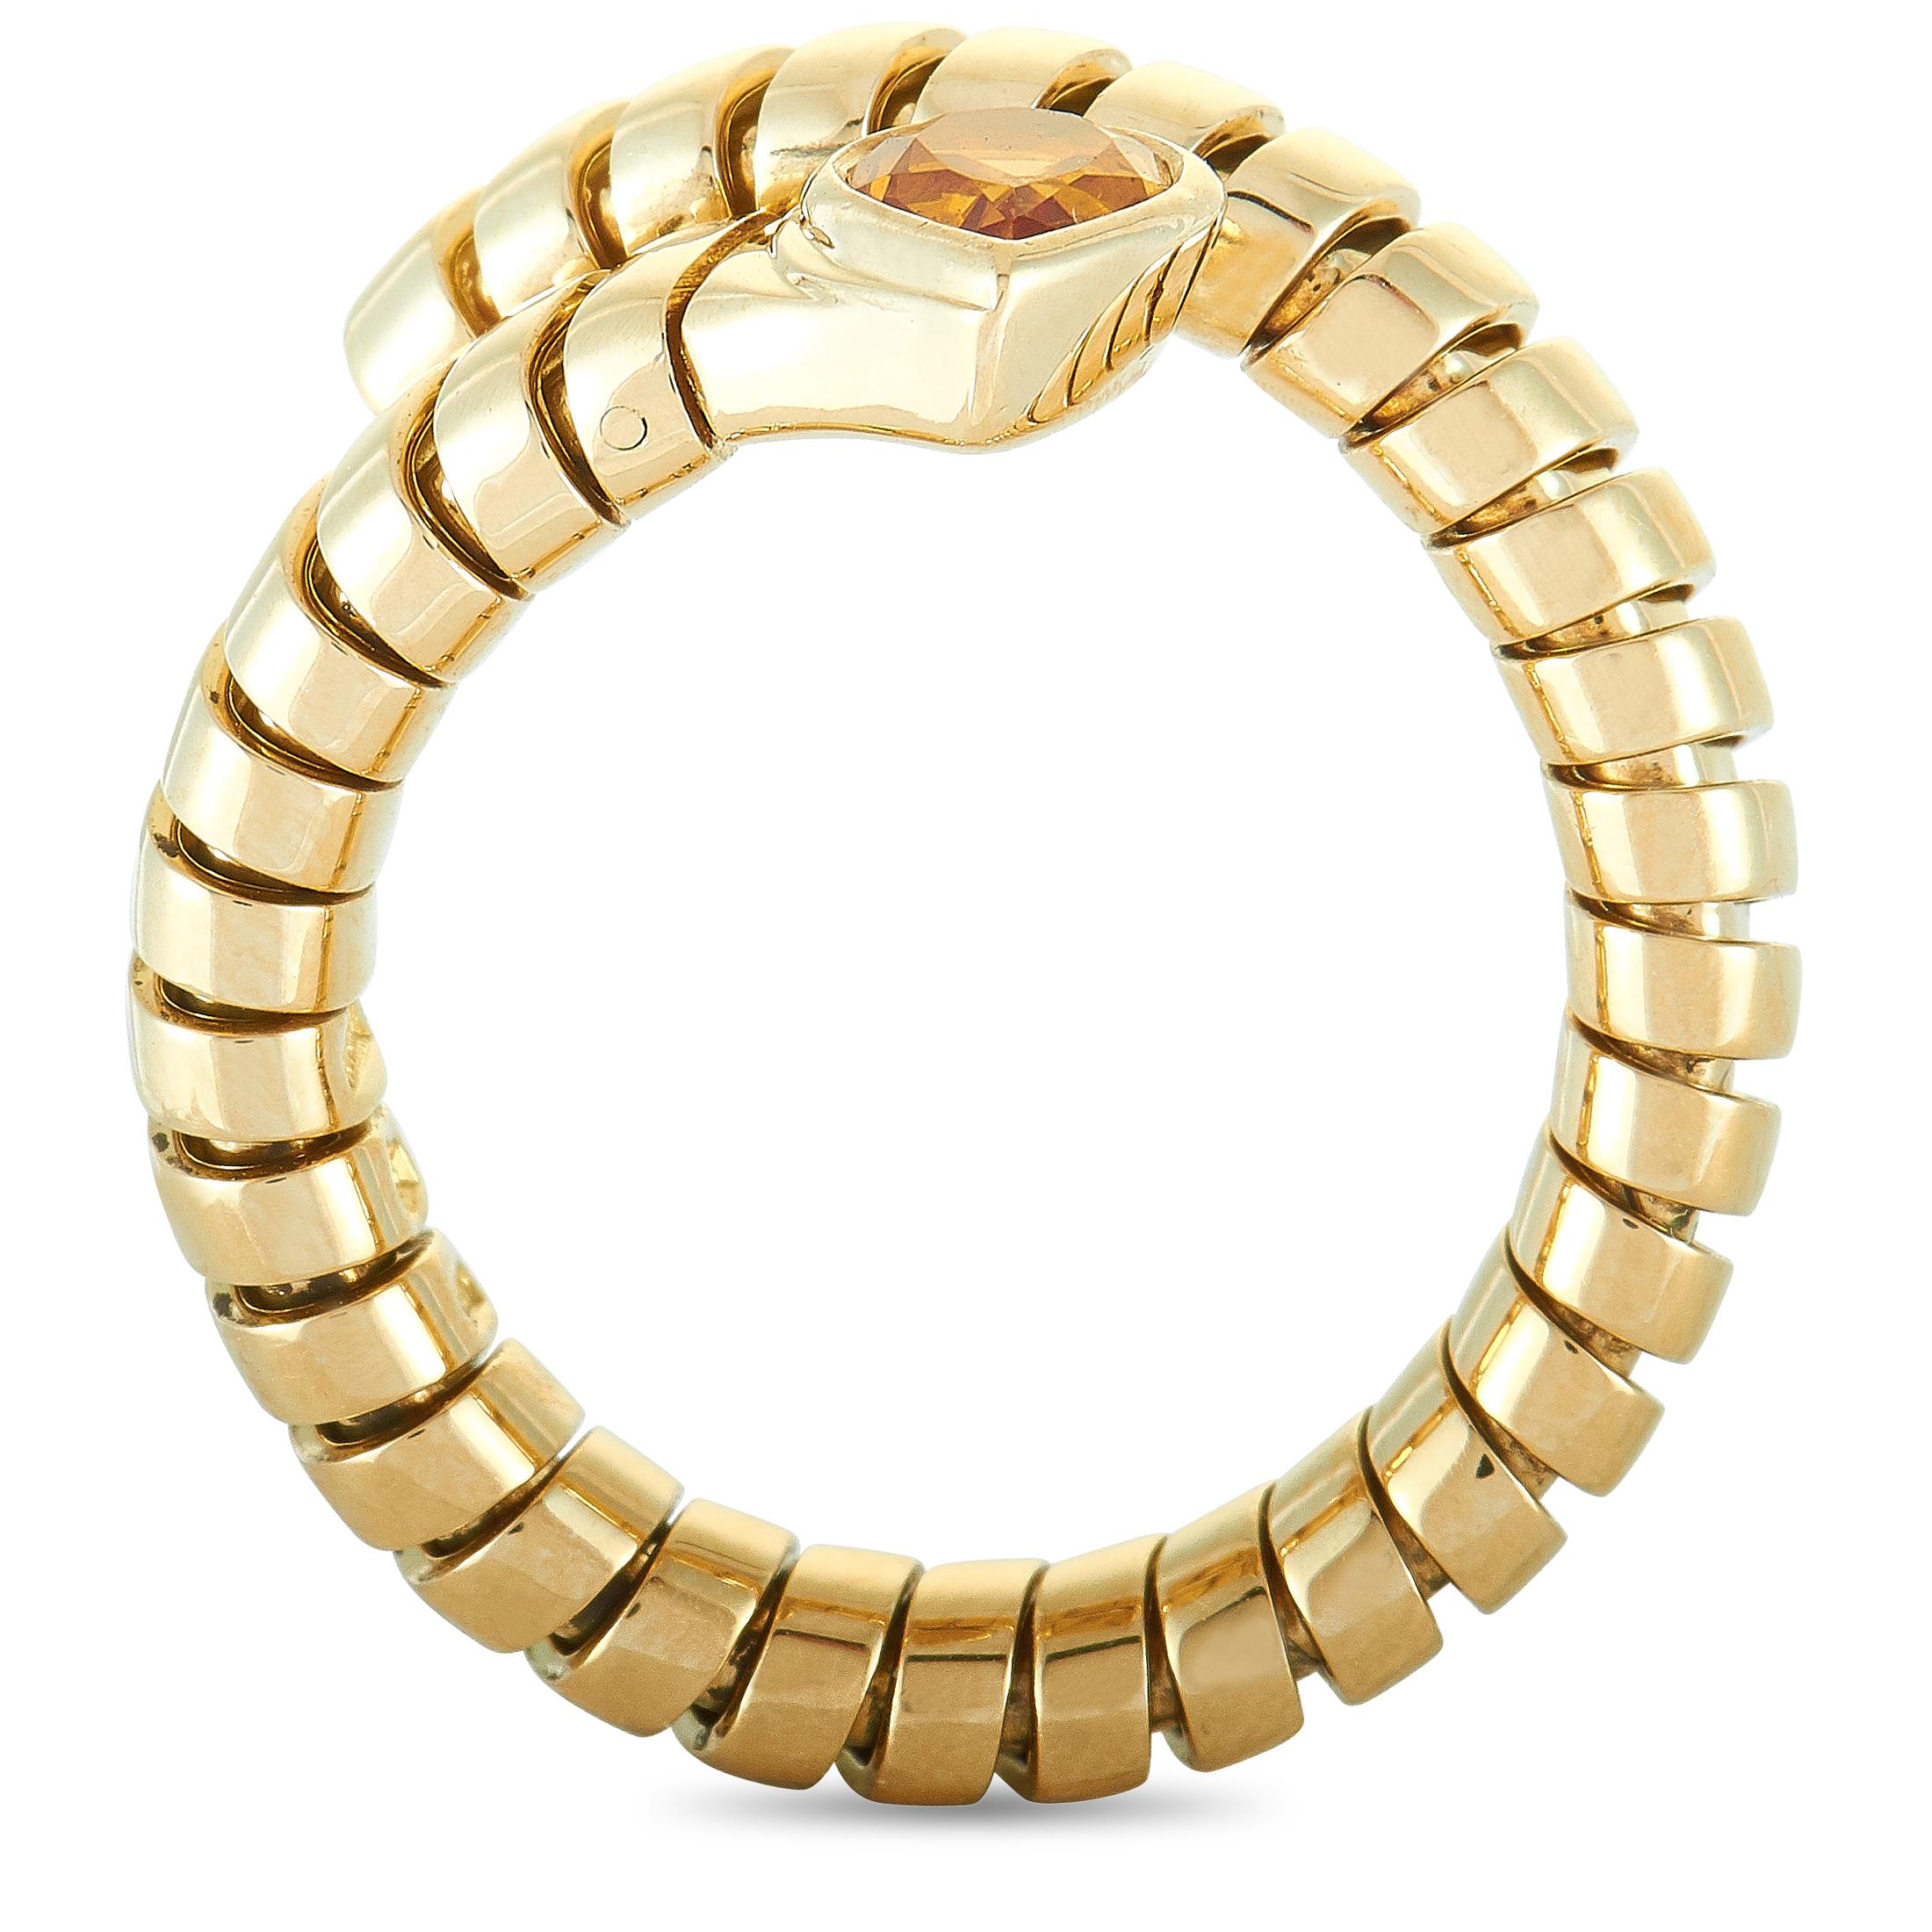 The Bvlgari “Tubogas” ring is crafted from 18K yellow gold and set with a citrine. The ring weighs 9.7 grams, boasting band thickness of 5 mm and top height of 3 mm, while top dimensions measure 8 by 5 mm.

This jewelry piece is offered in estate